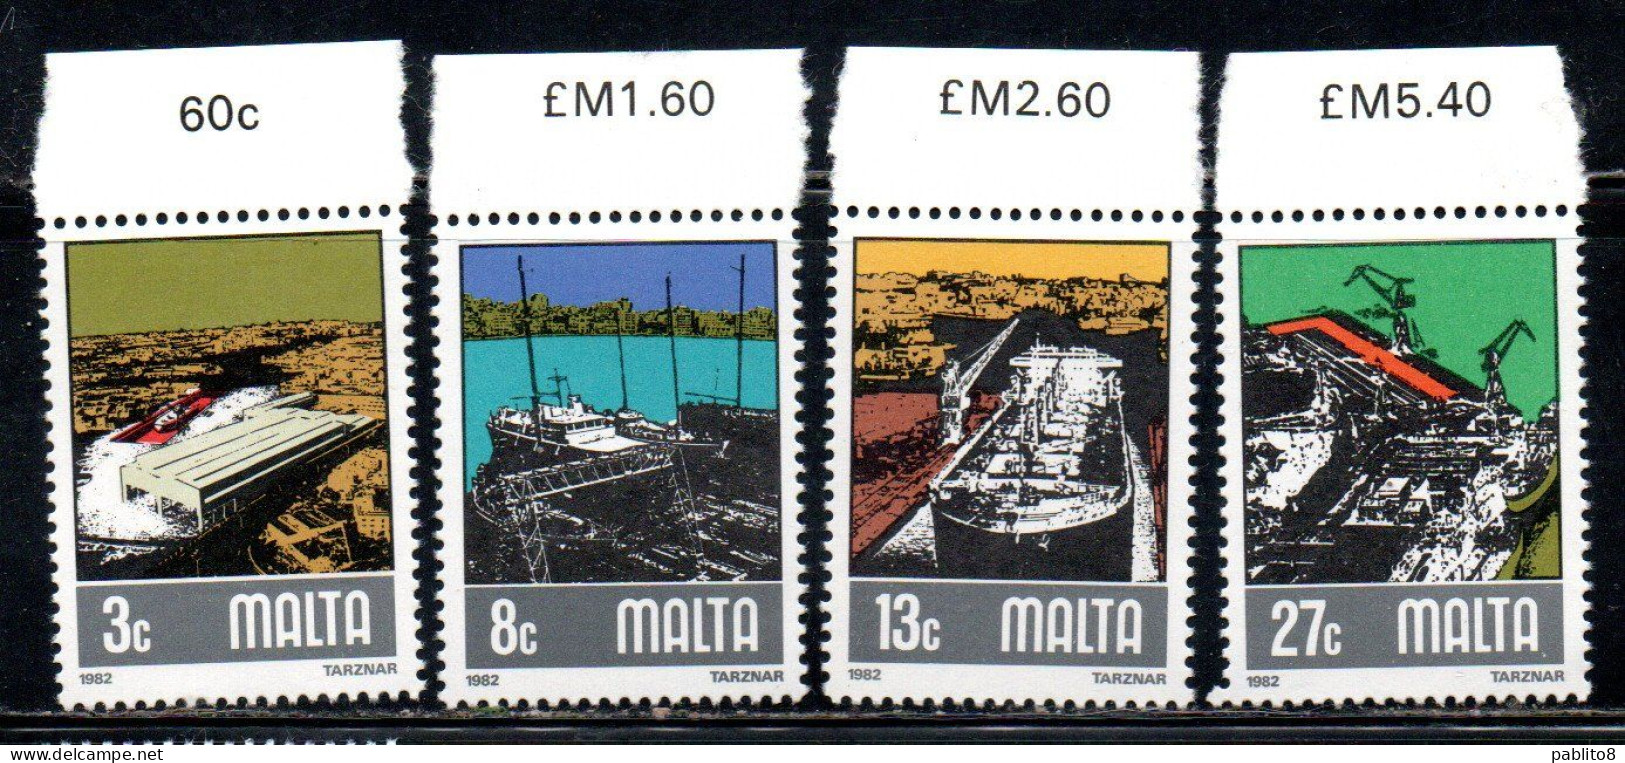 MALTA 1982 SHIPBUILDING AND REPAIRING, TARZNAR SHIPYARDS. ASSEMBLY CANTIERE NAVALE COMPLETE SET SERIE COMPLETA MNH - Malta